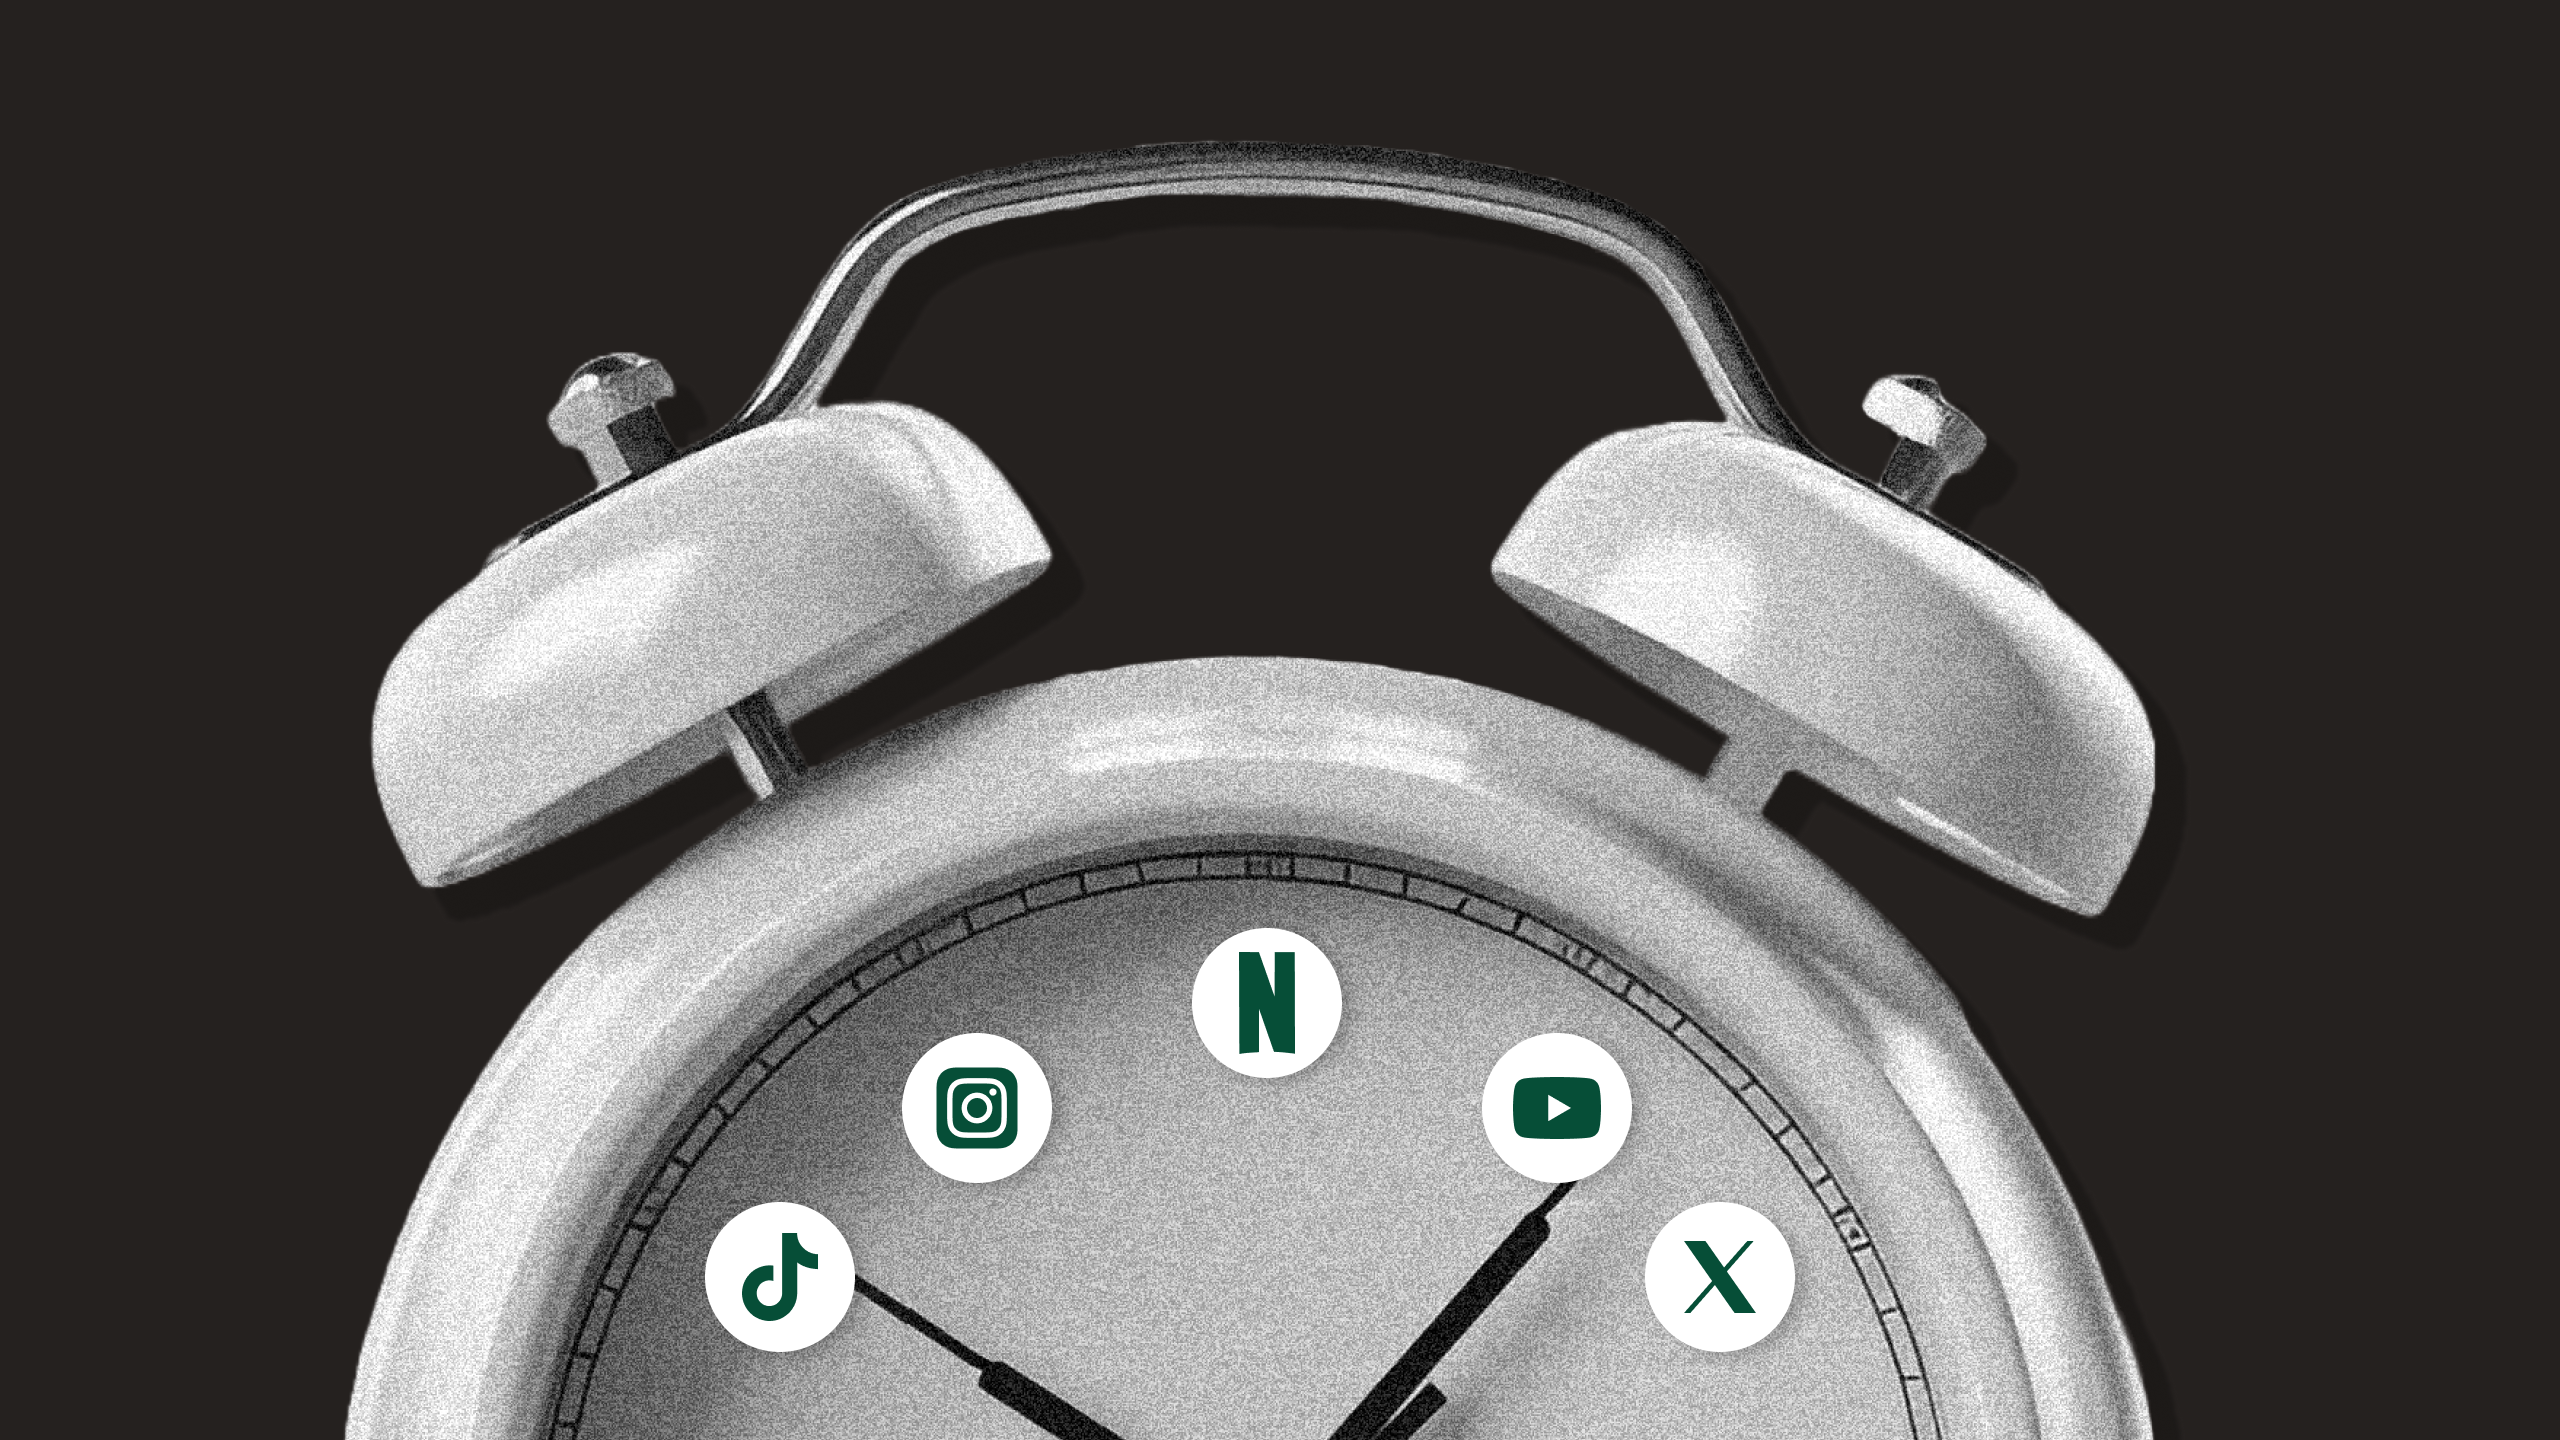 Photo illustration of an alarm clock with TikTok, Instagram, Netflix, YouTube, and X logos at different positions on the clock